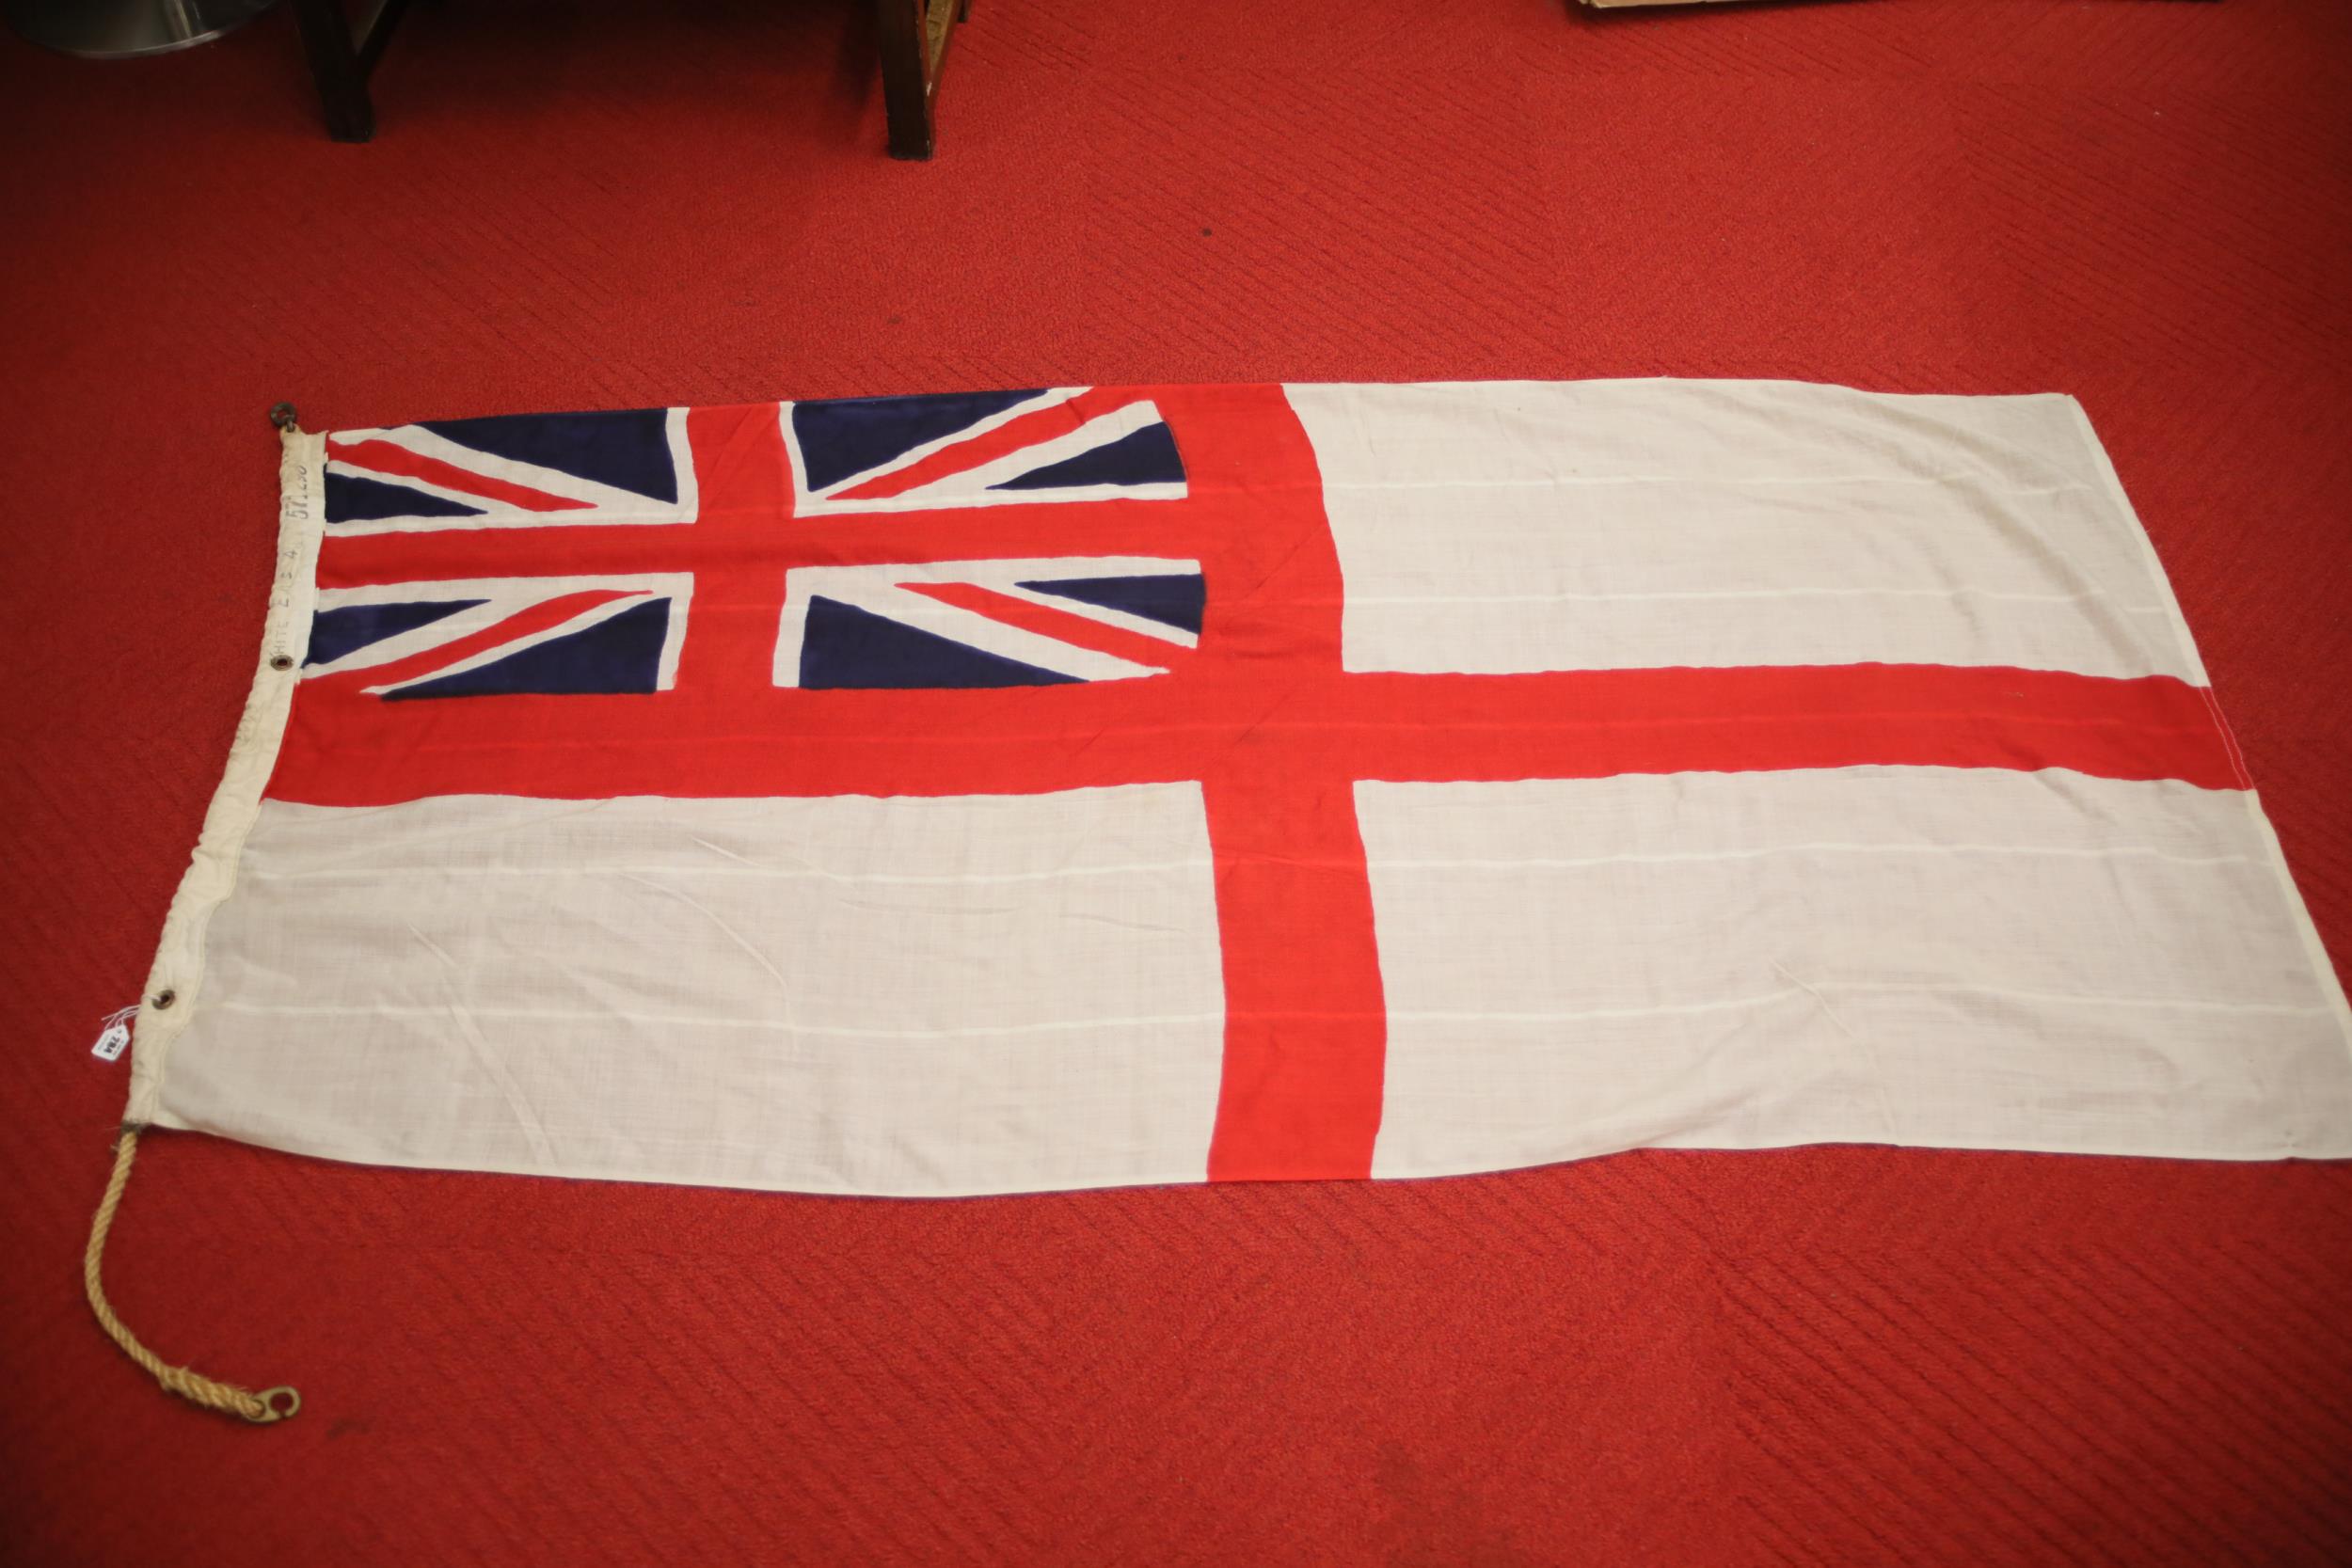 White Ensign Number 4 5715298 British Flag From HMS Ark Royal - Image 6 of 8